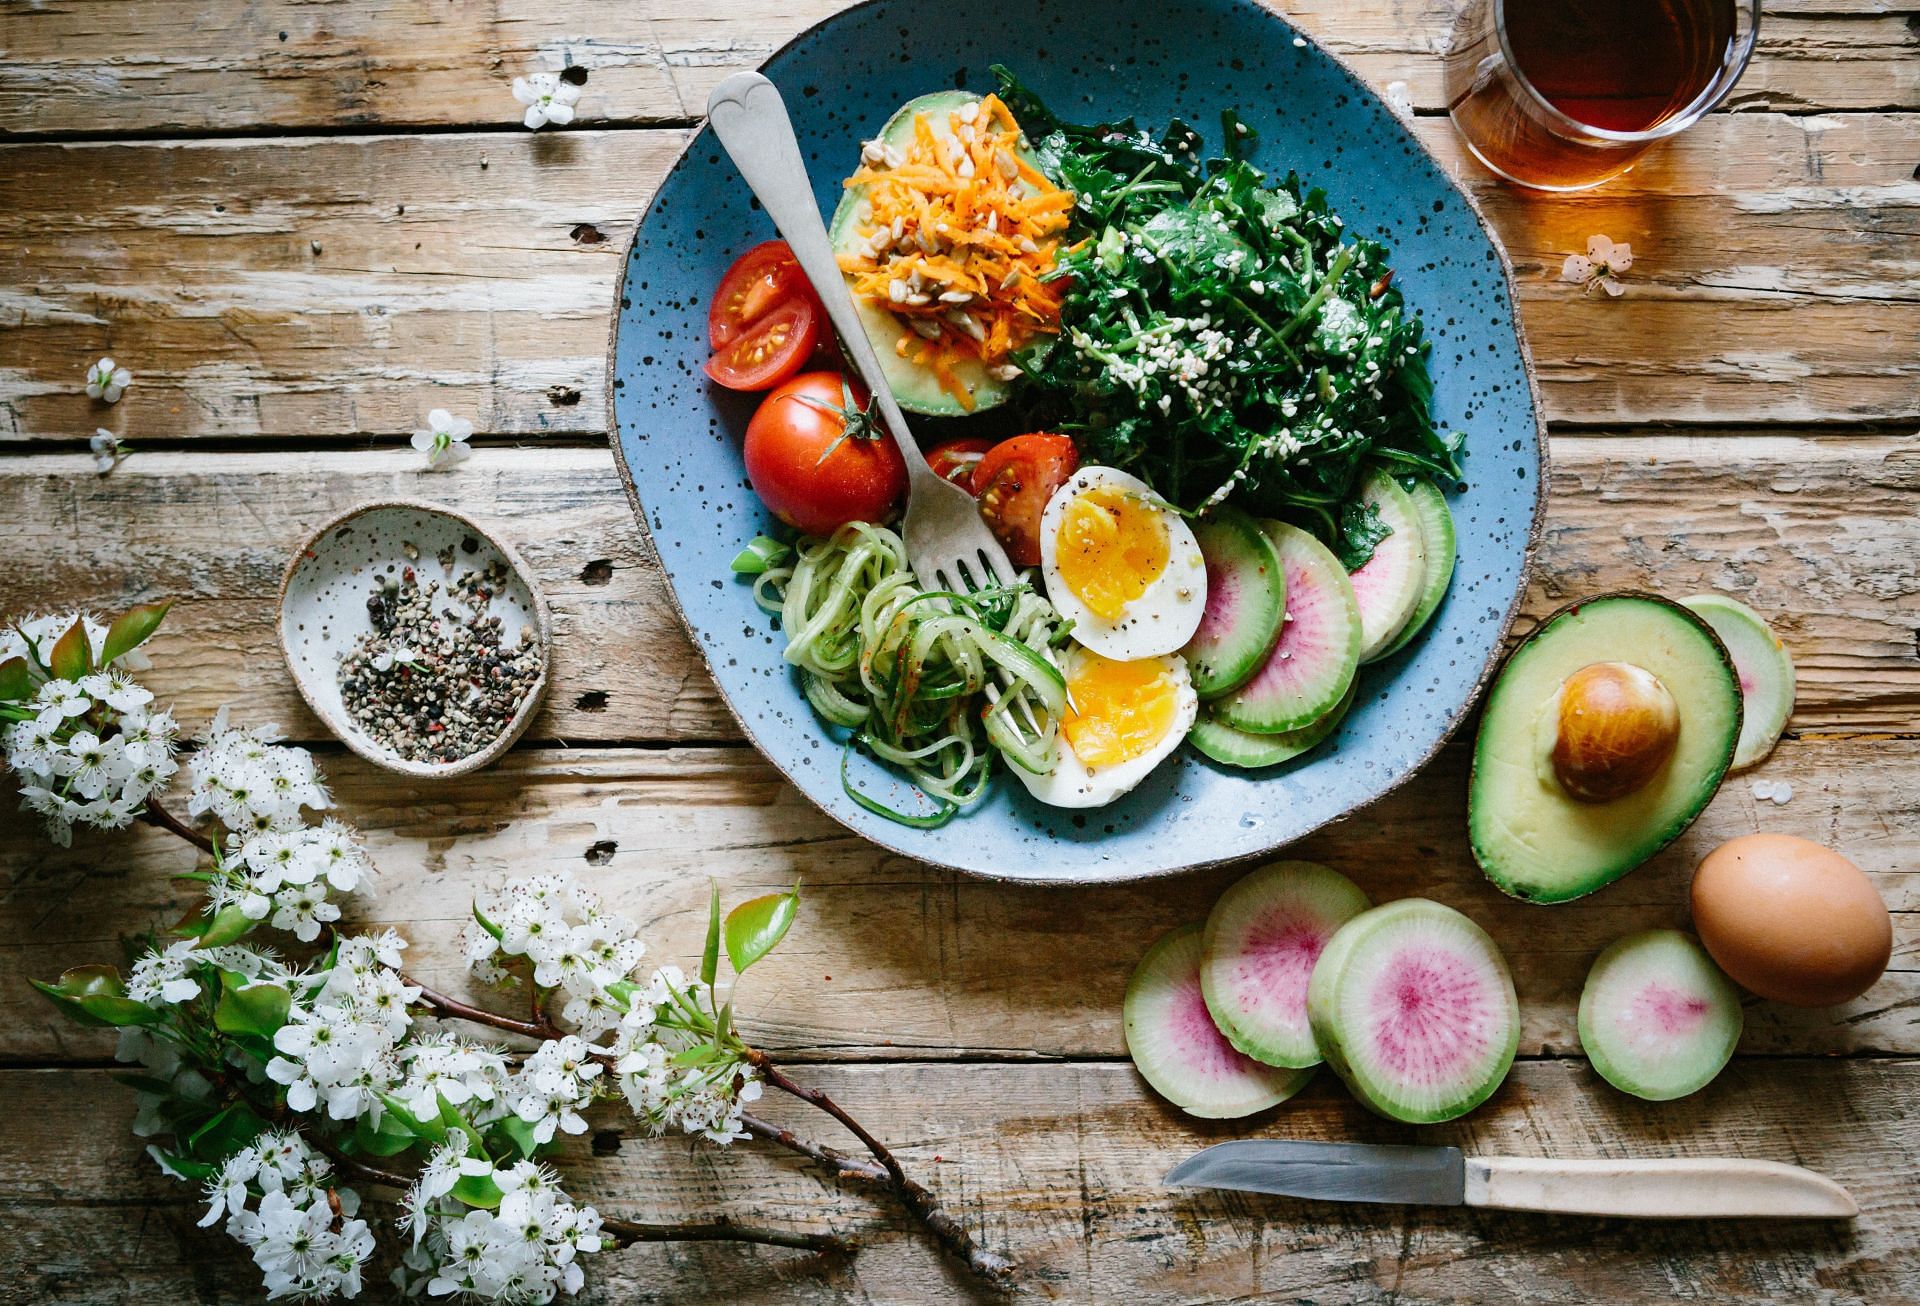 Low-carb foods are best to lower A1c with diet. (Image via Unsplash/Brooke Lark)